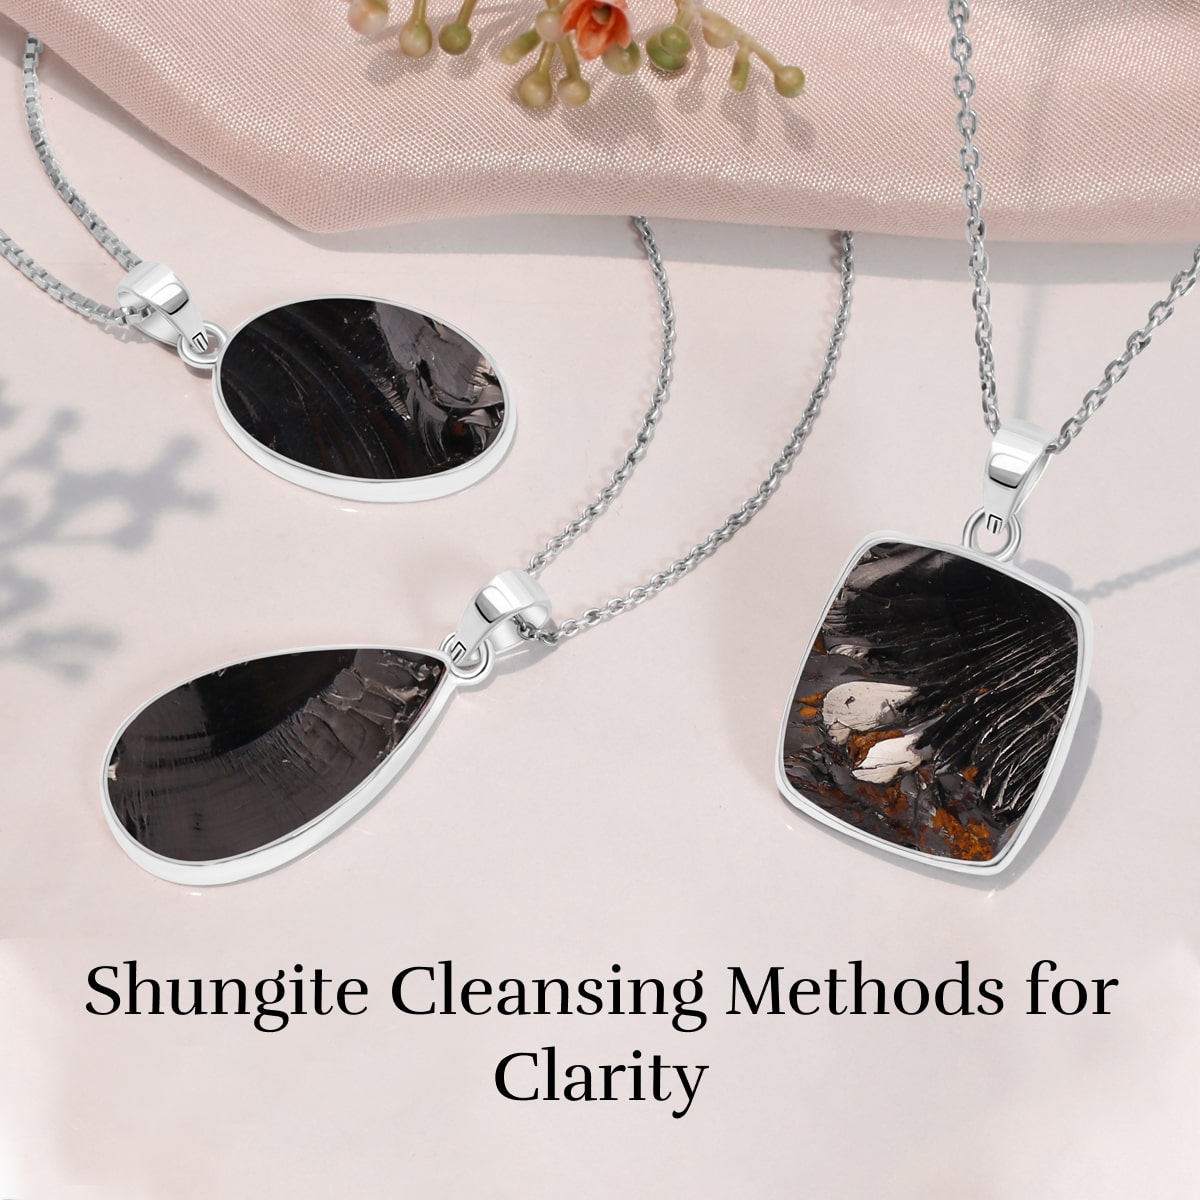 How To Cleanse Shungite